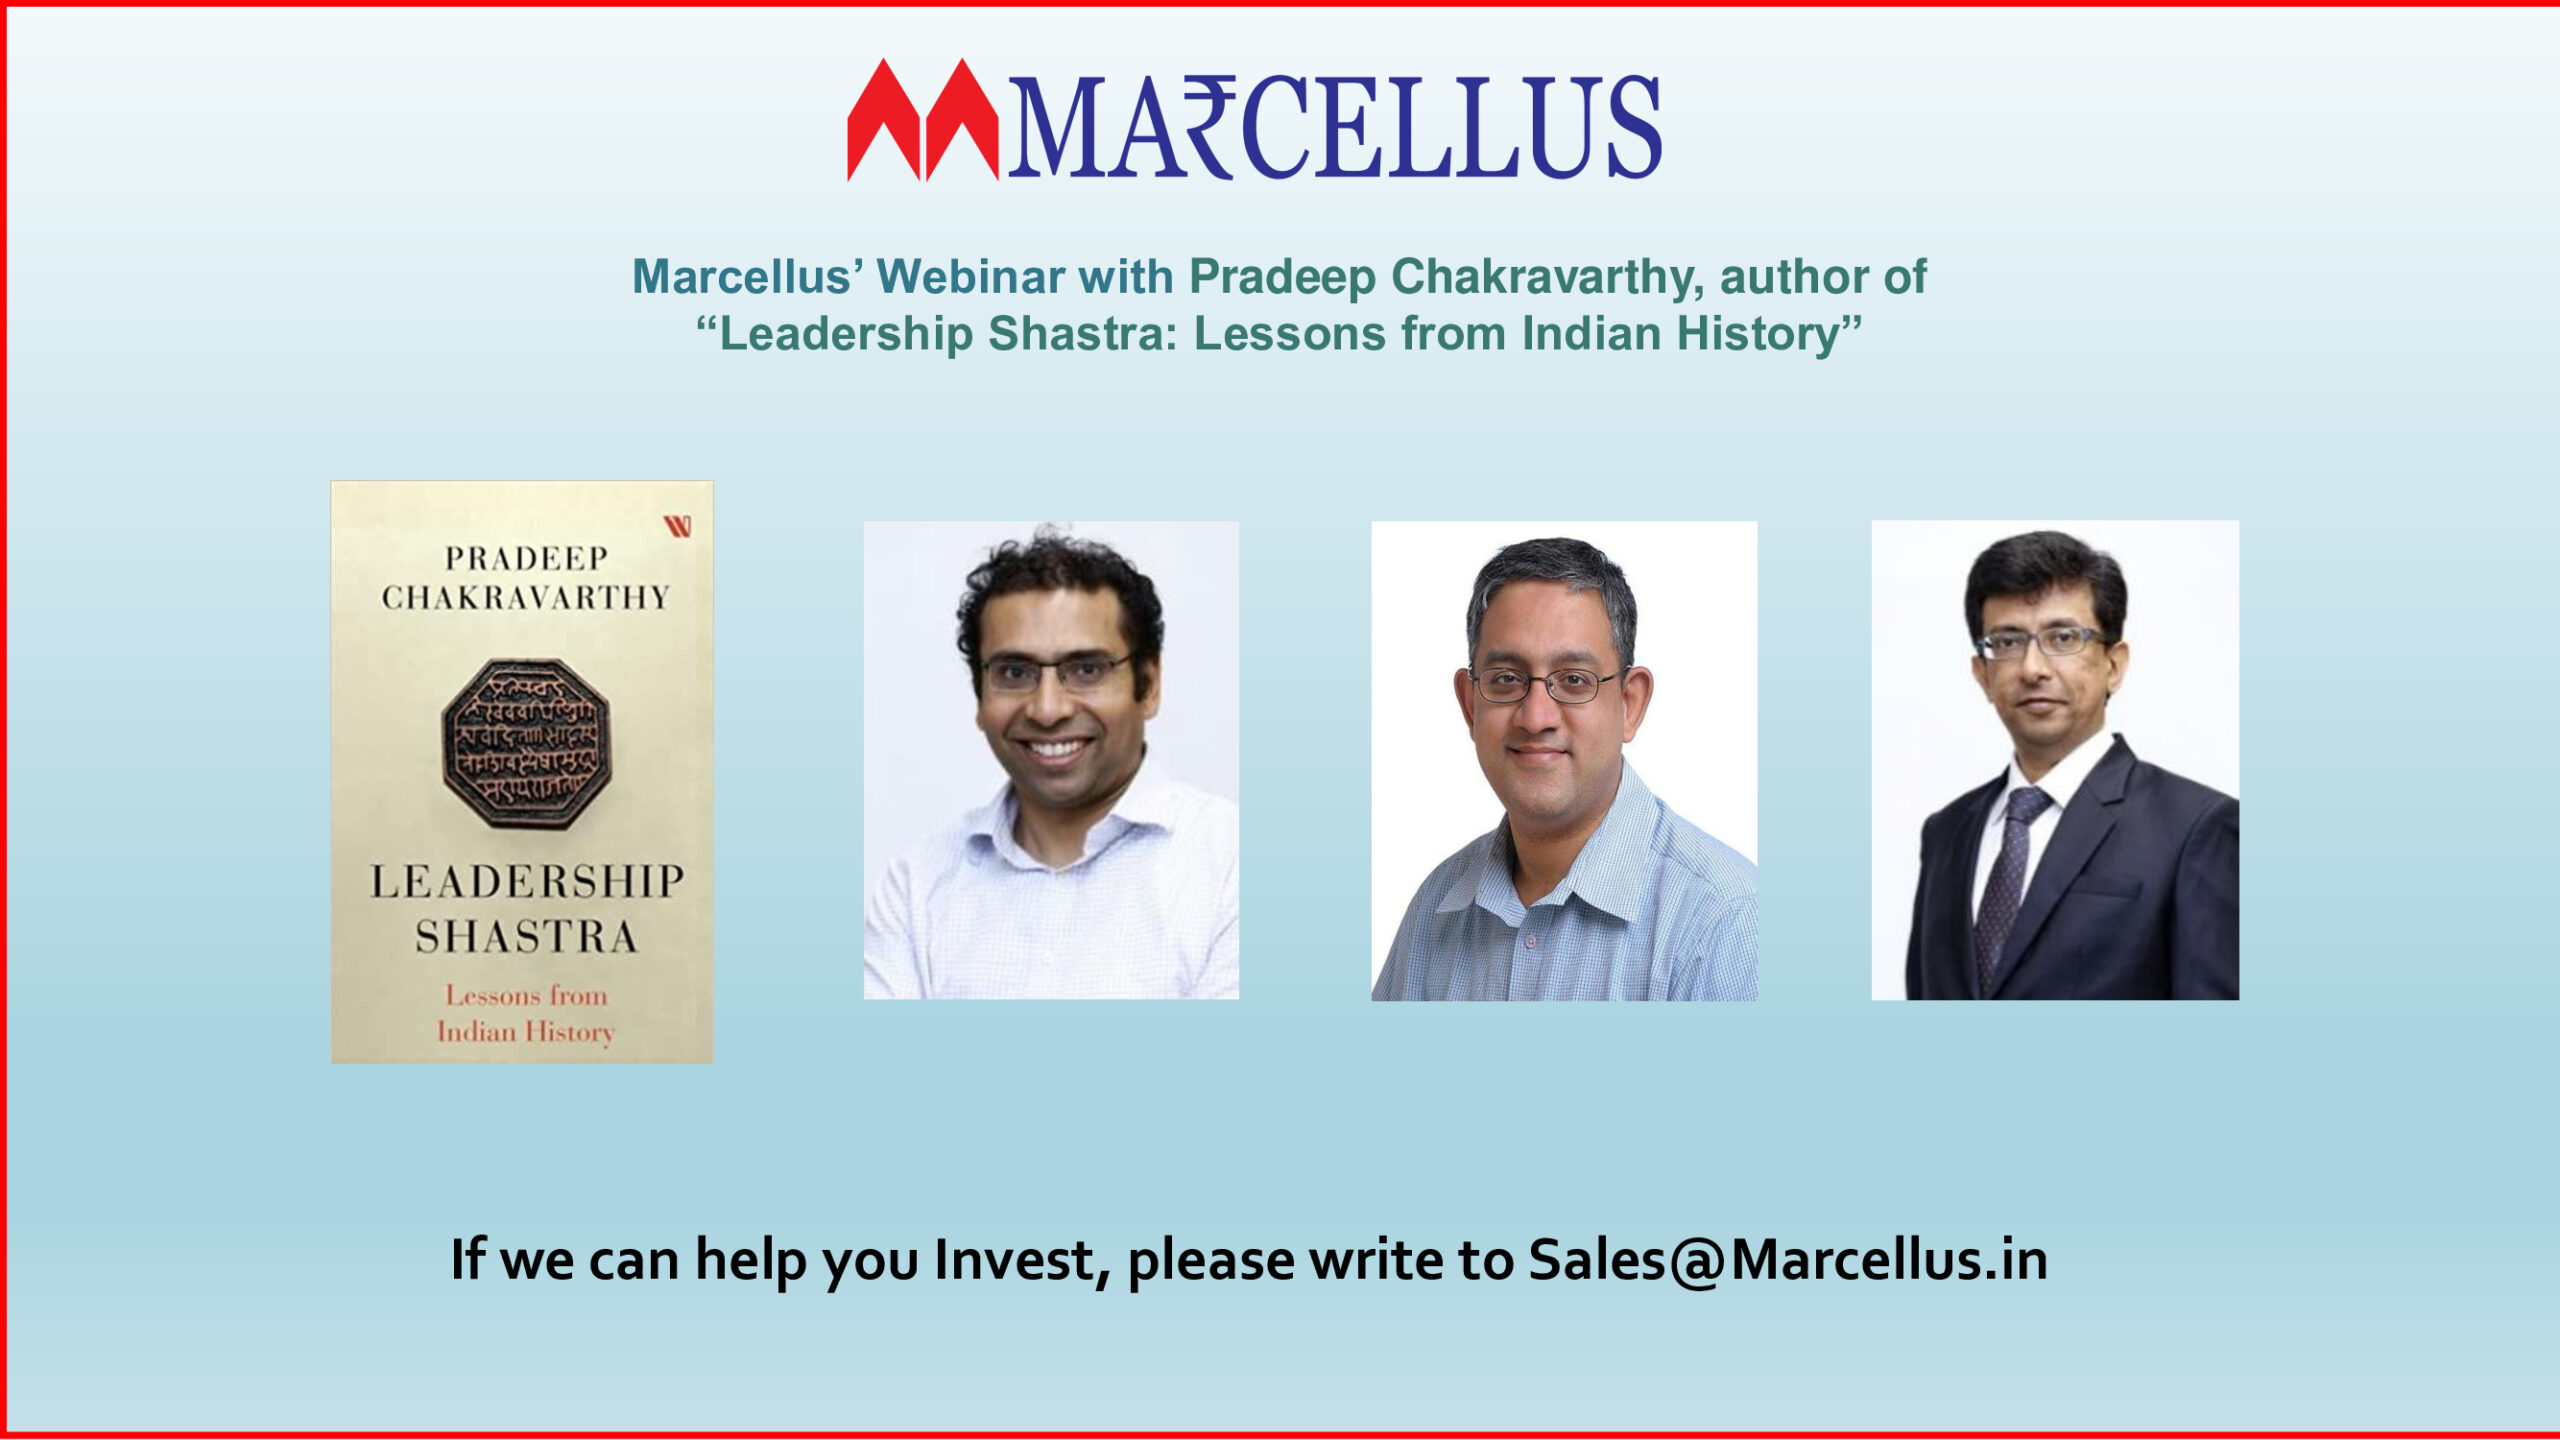 Marcellus Webinar with Pradeep Chakravarthy the author of famous book 